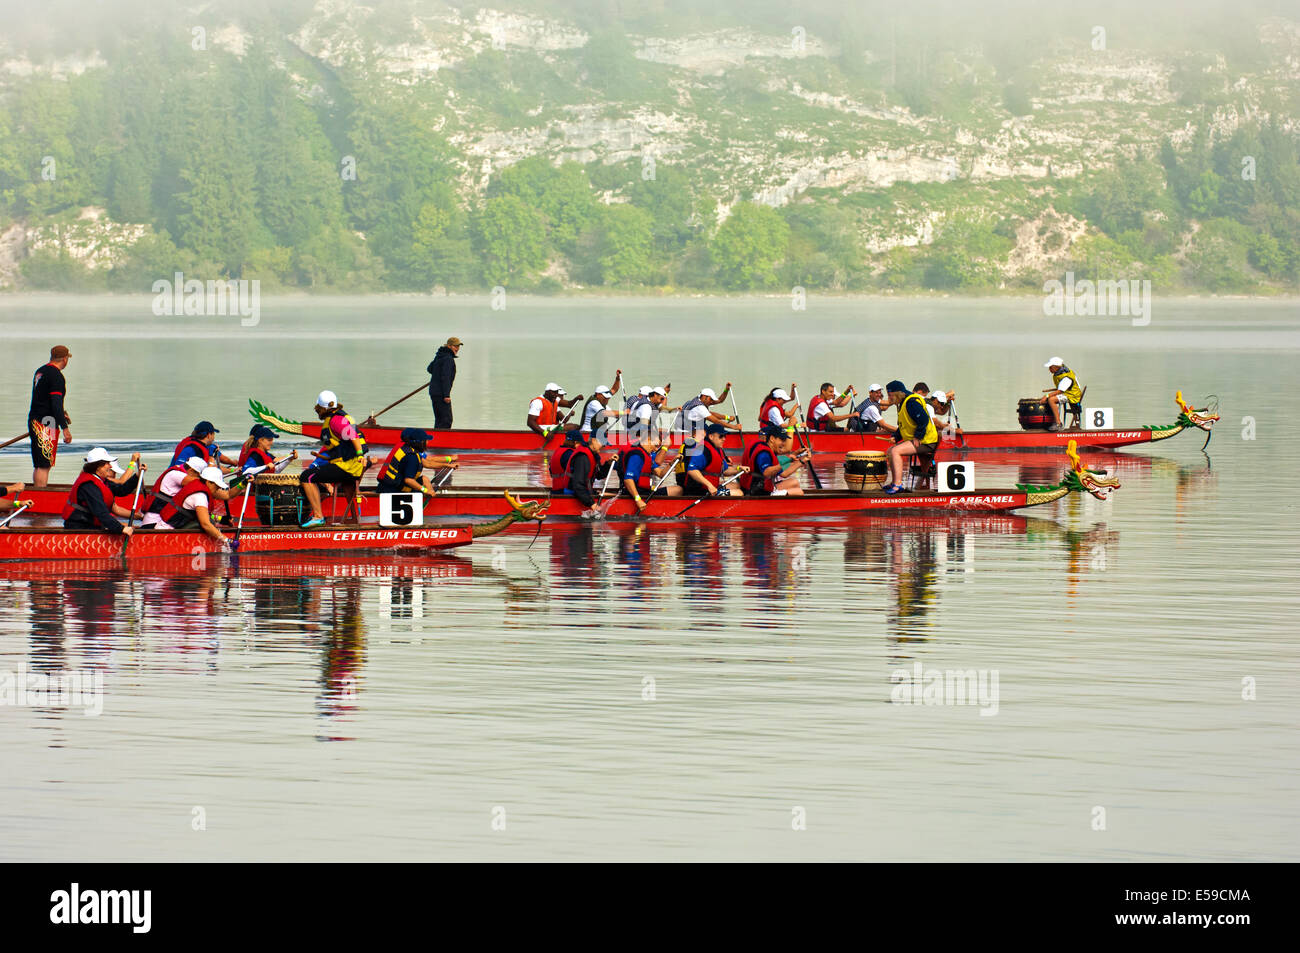 Team event of dragon boat racing by the Dragonboat Club Eglisau on the lake Lac de Joux, Vallée de Joux, Canton of Vaud, Switzer Stock Photo